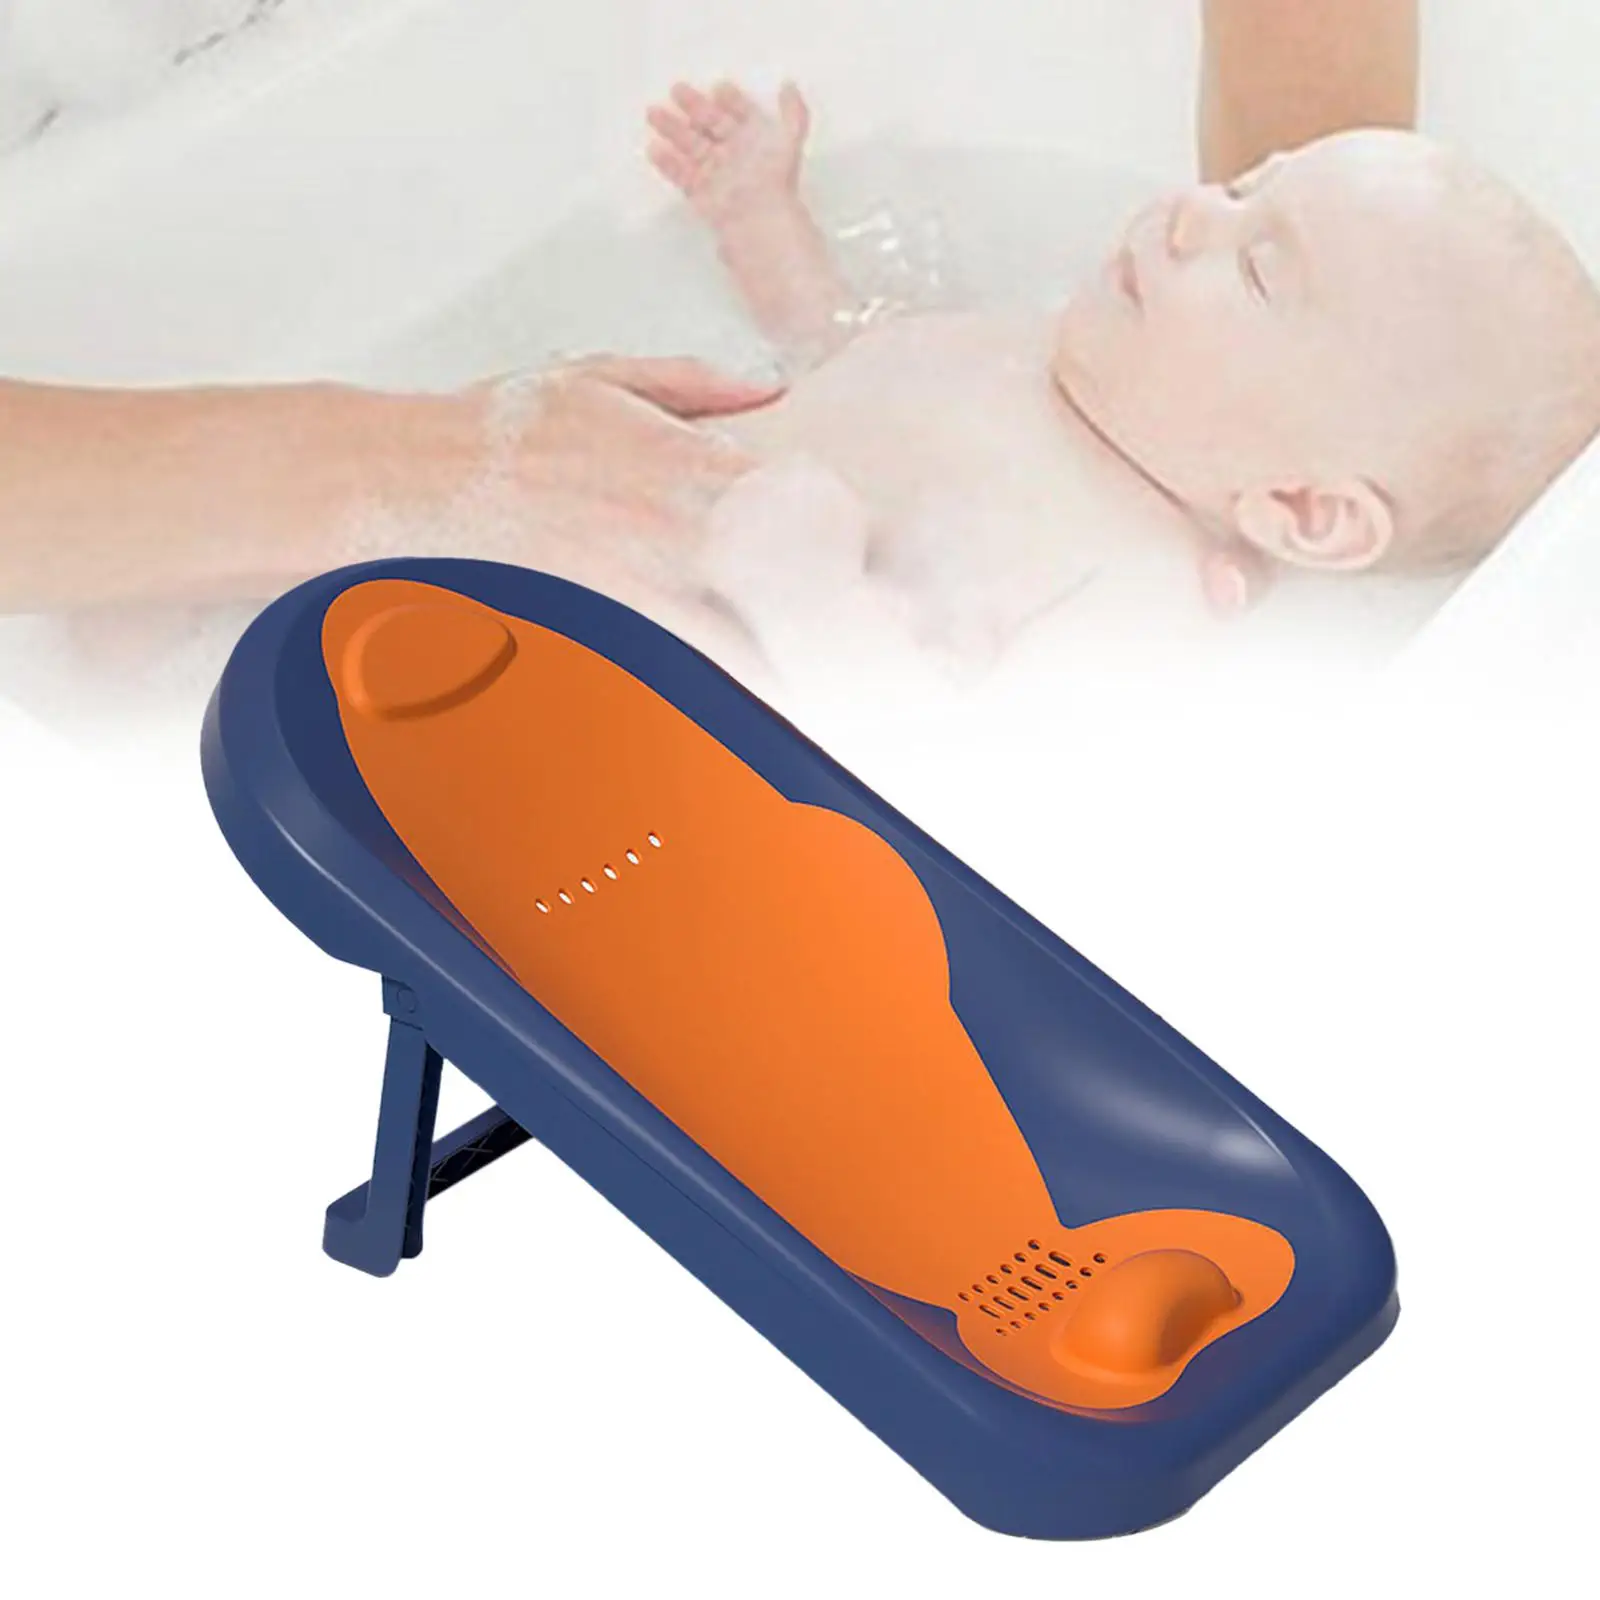 bath Seat Support Rack Anti Slip Soft Comfortable Shower Rack for 0-6 Months